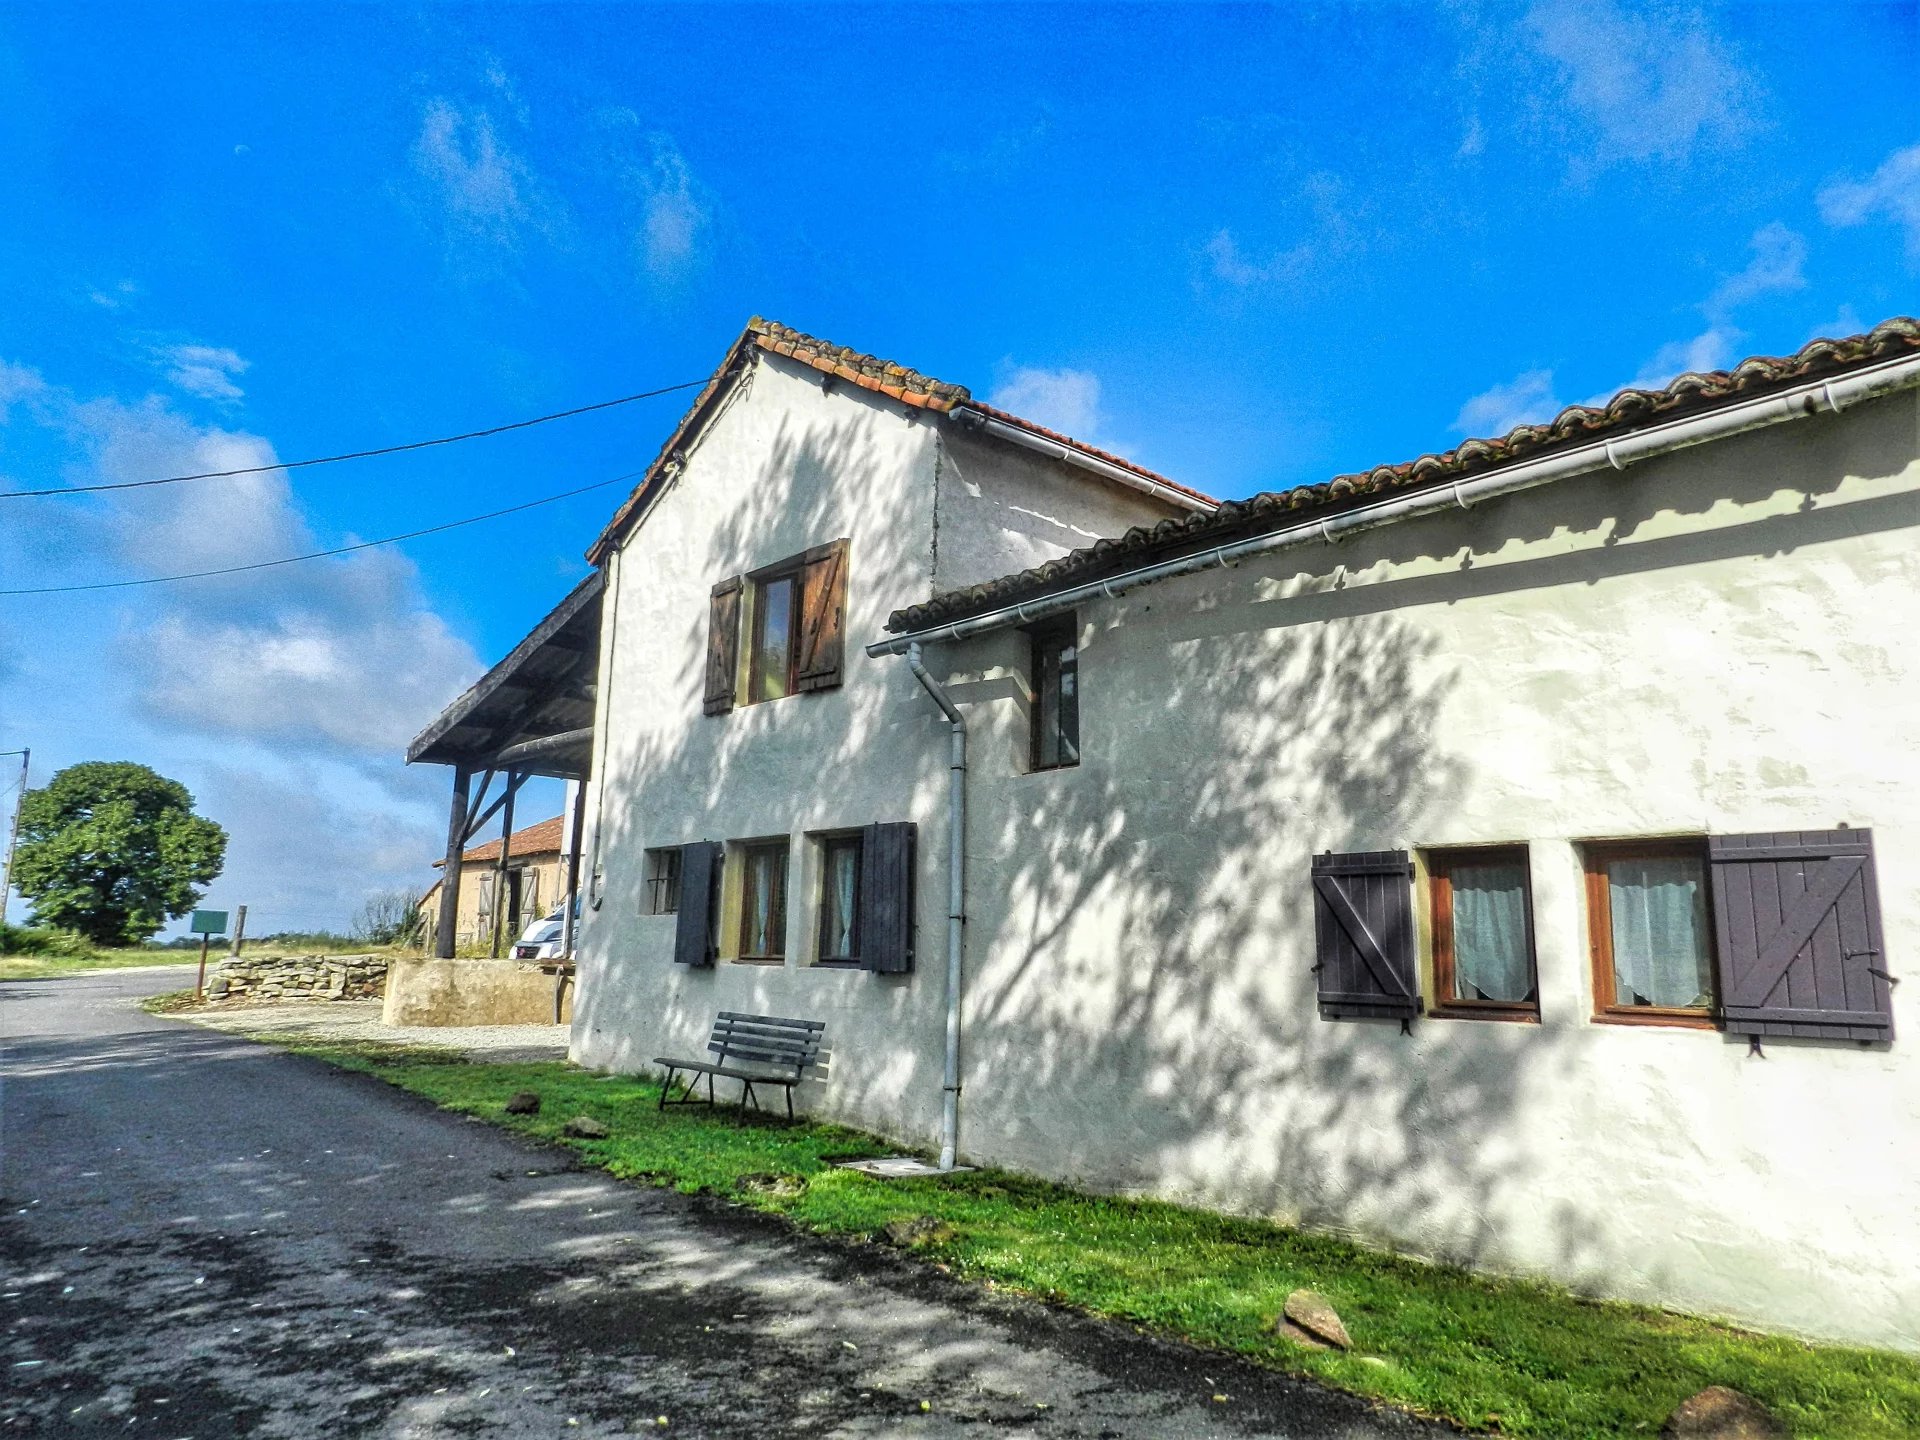 Two/three bedroom, two bathroom property. Countryside living close to popular Vienne village locatio